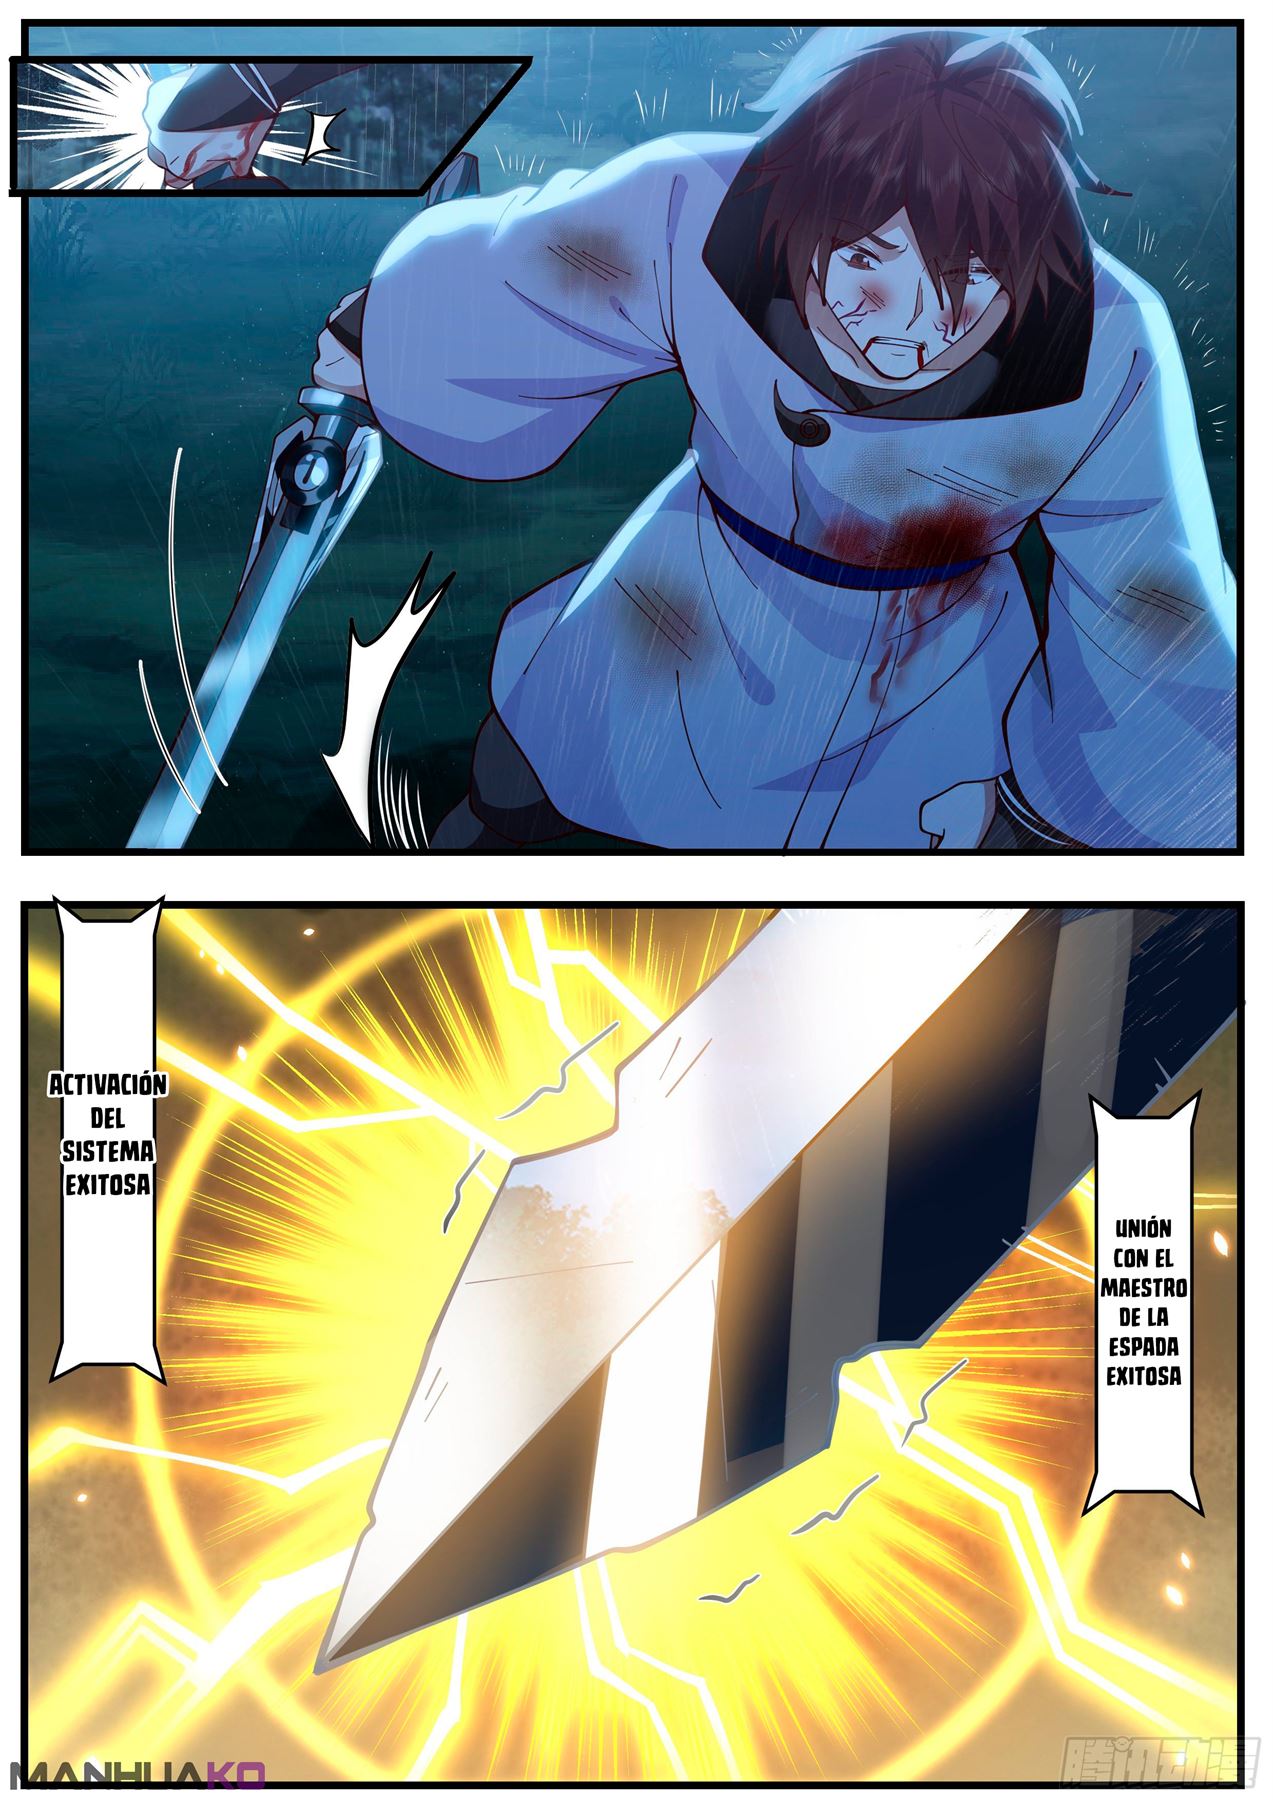 Manga Killing Evolution From a Sword Chapter 1.1 image number 3